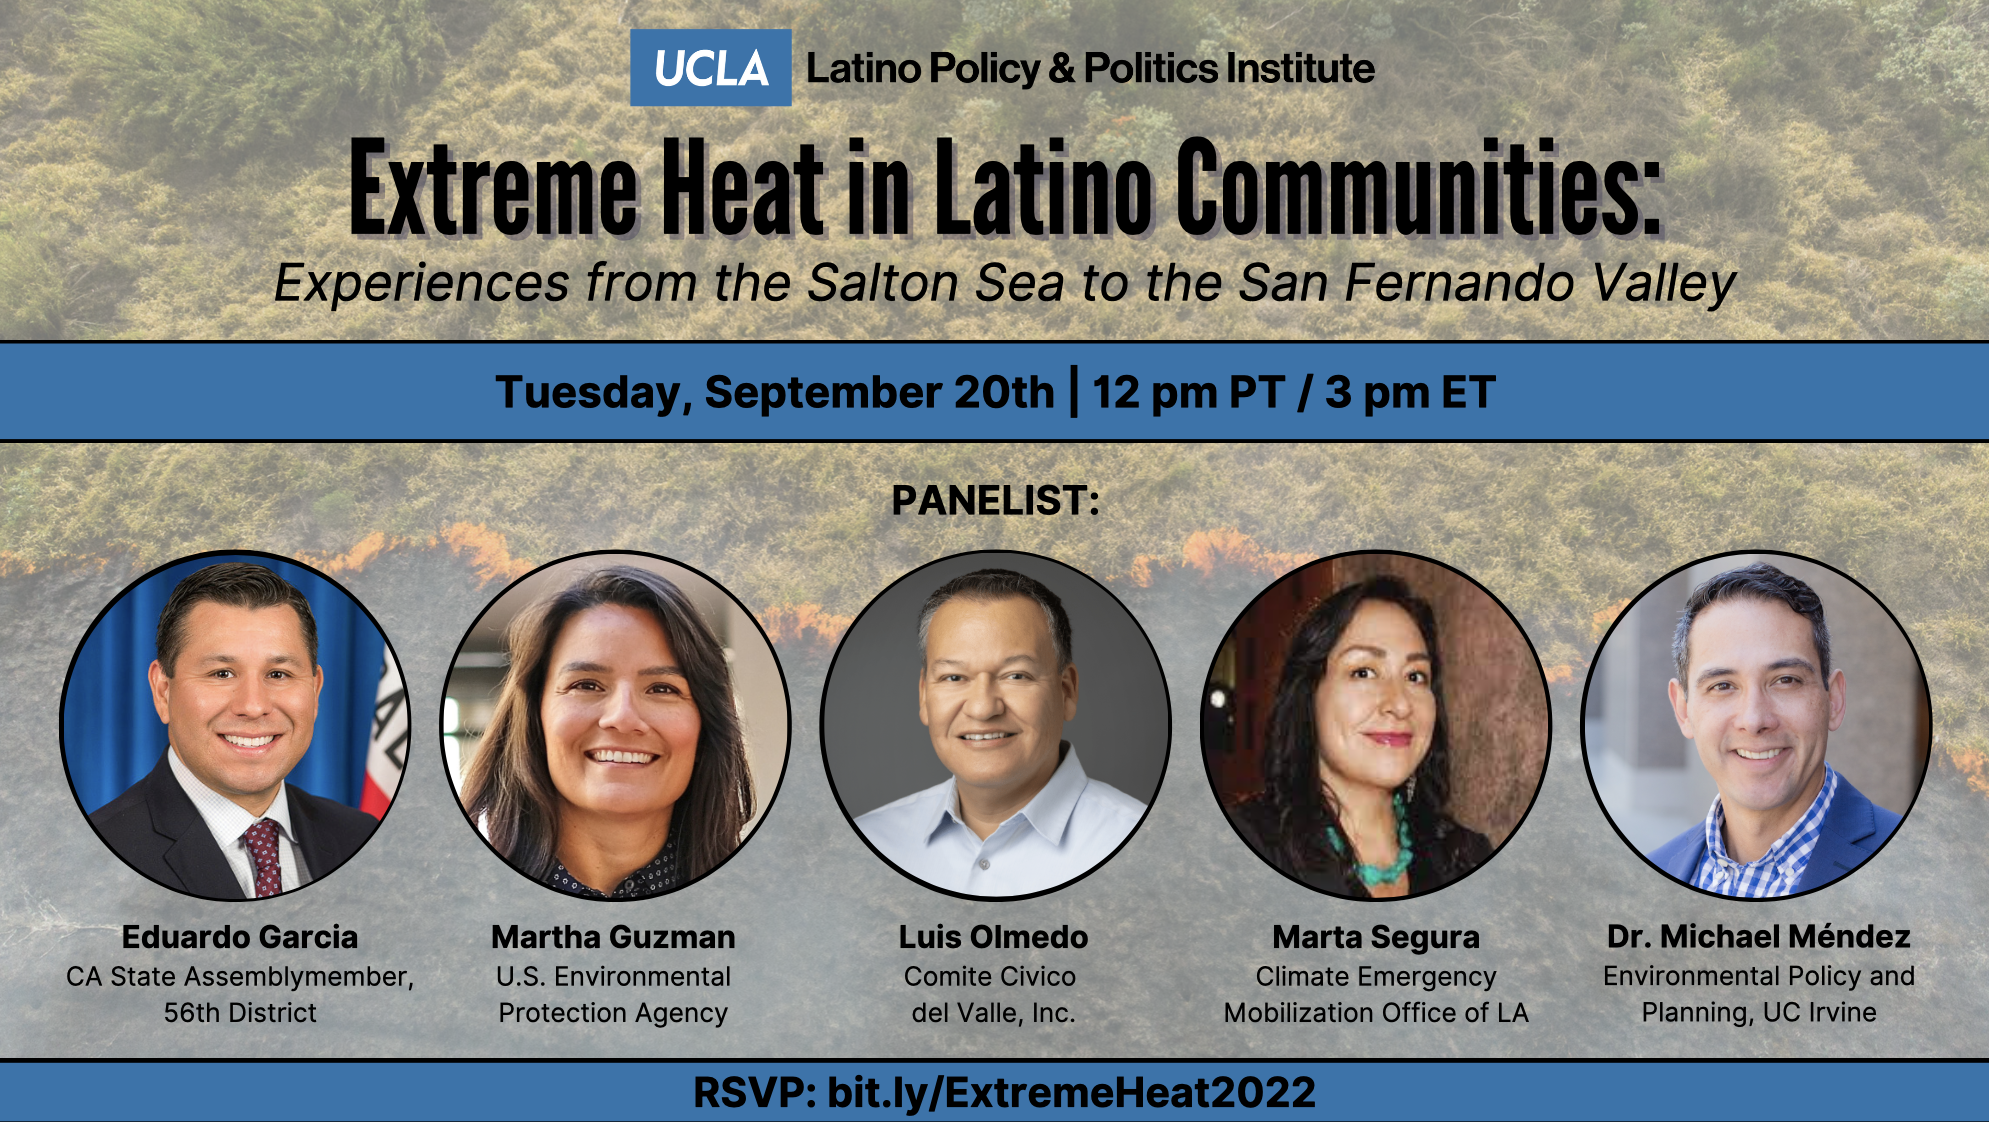 Extreme Heat in Latino Communities: Experiences from the Salton Sea to the San Fernando Valley.